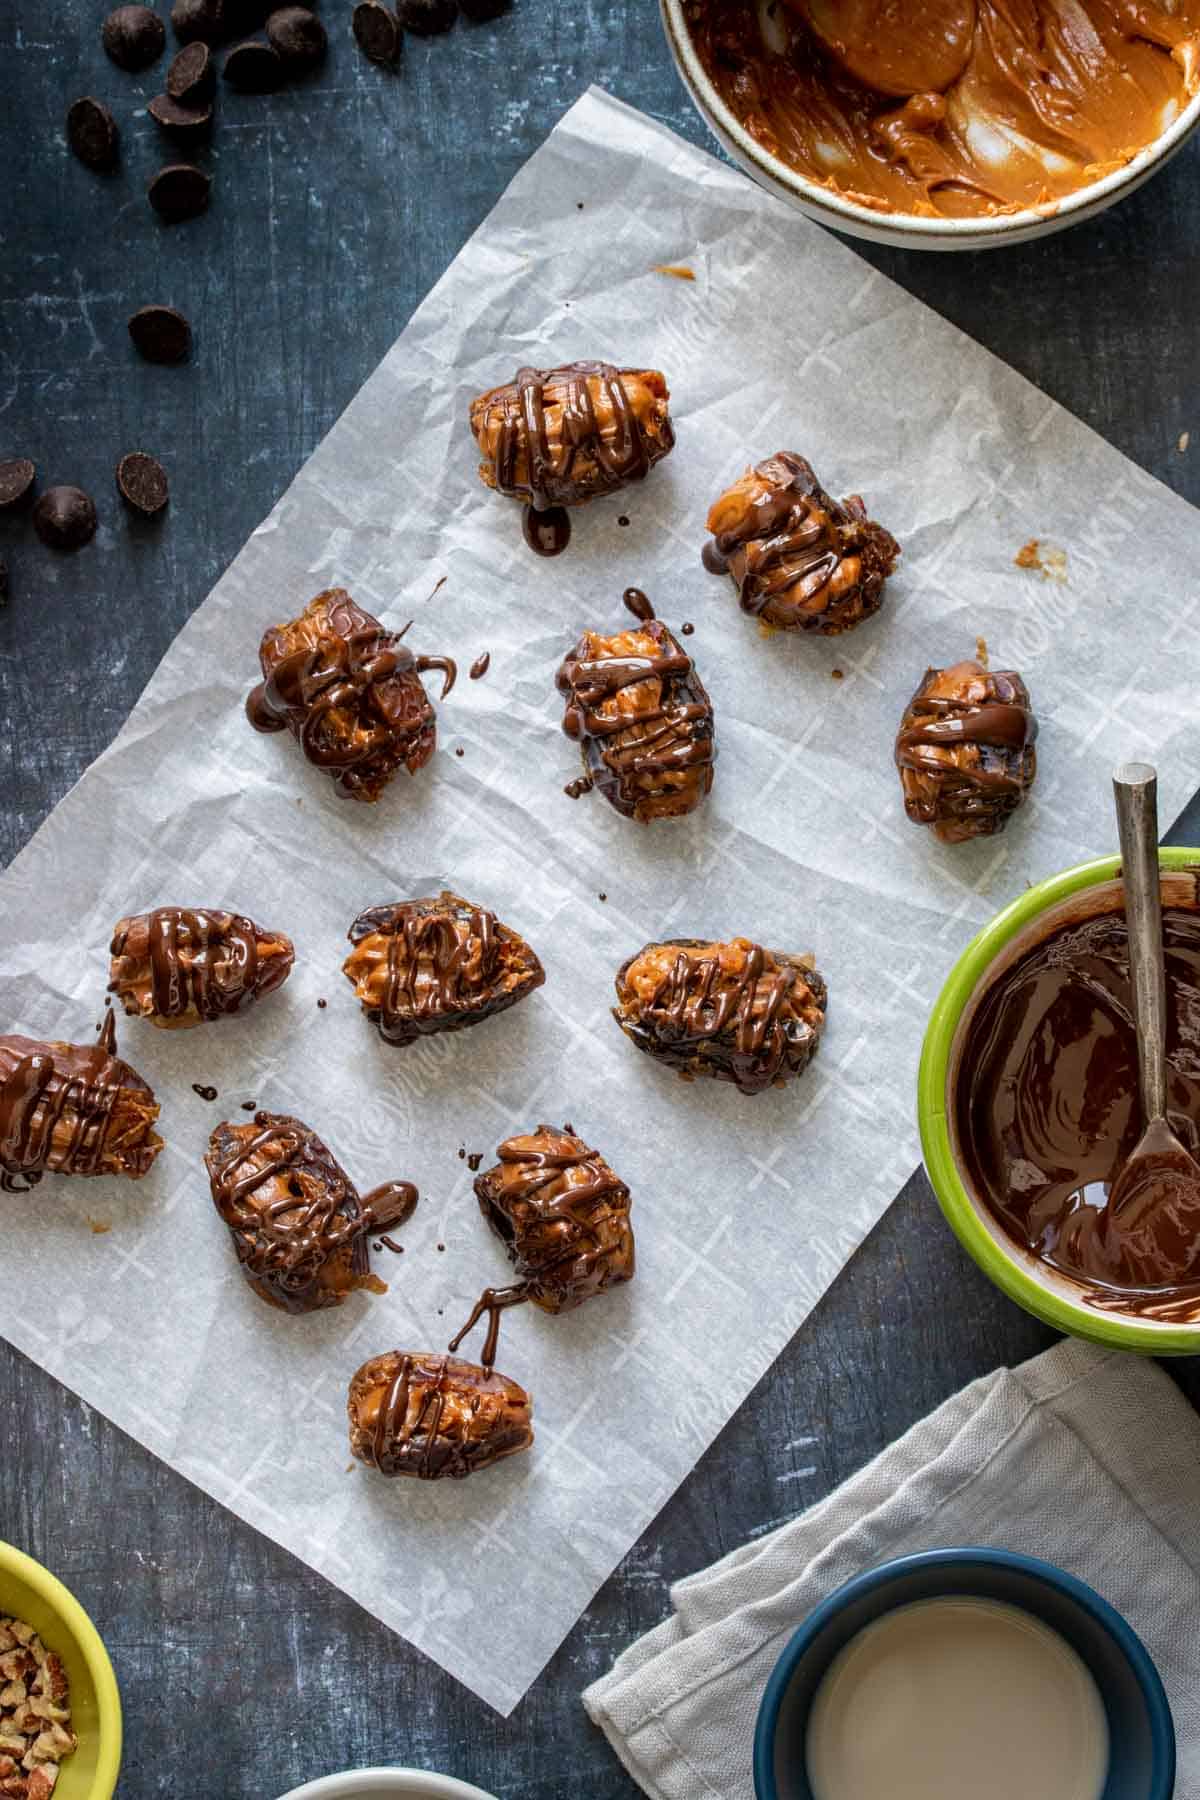 Top view of dates filled with nut butter and drizzled with chocolate on a piece of parchment paper